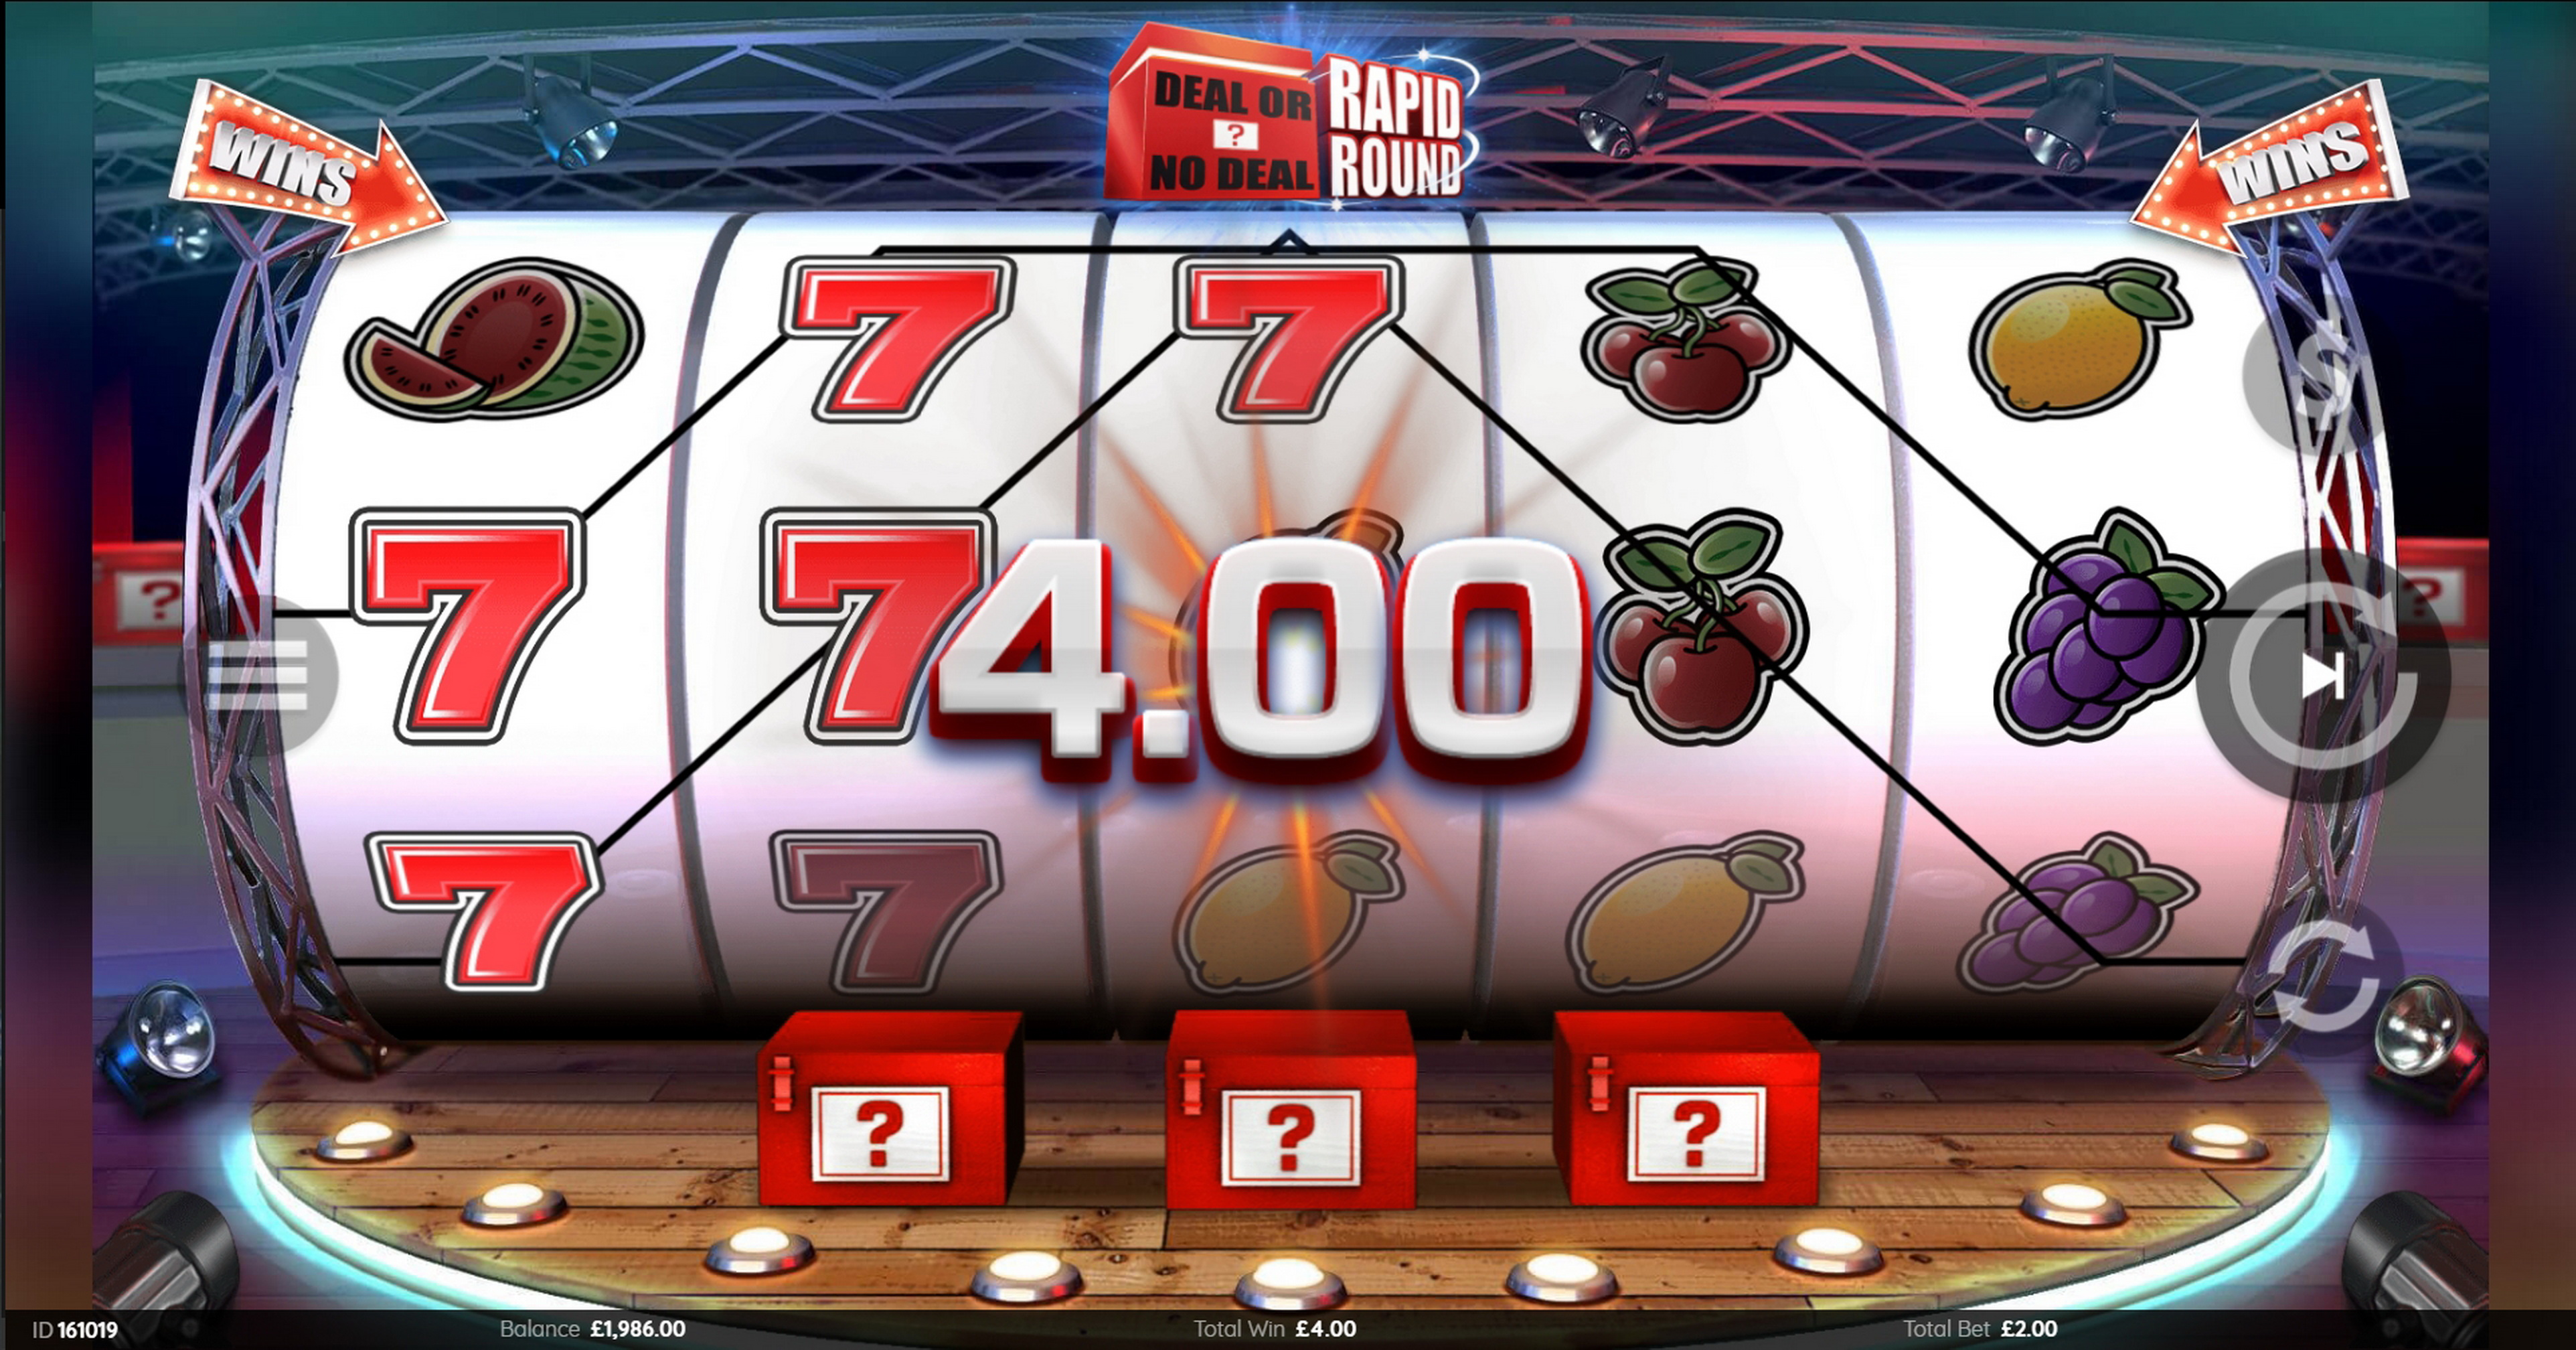 Win Money in Deal Or No Deal Rapid Round Free Slot Game by Endemol Games